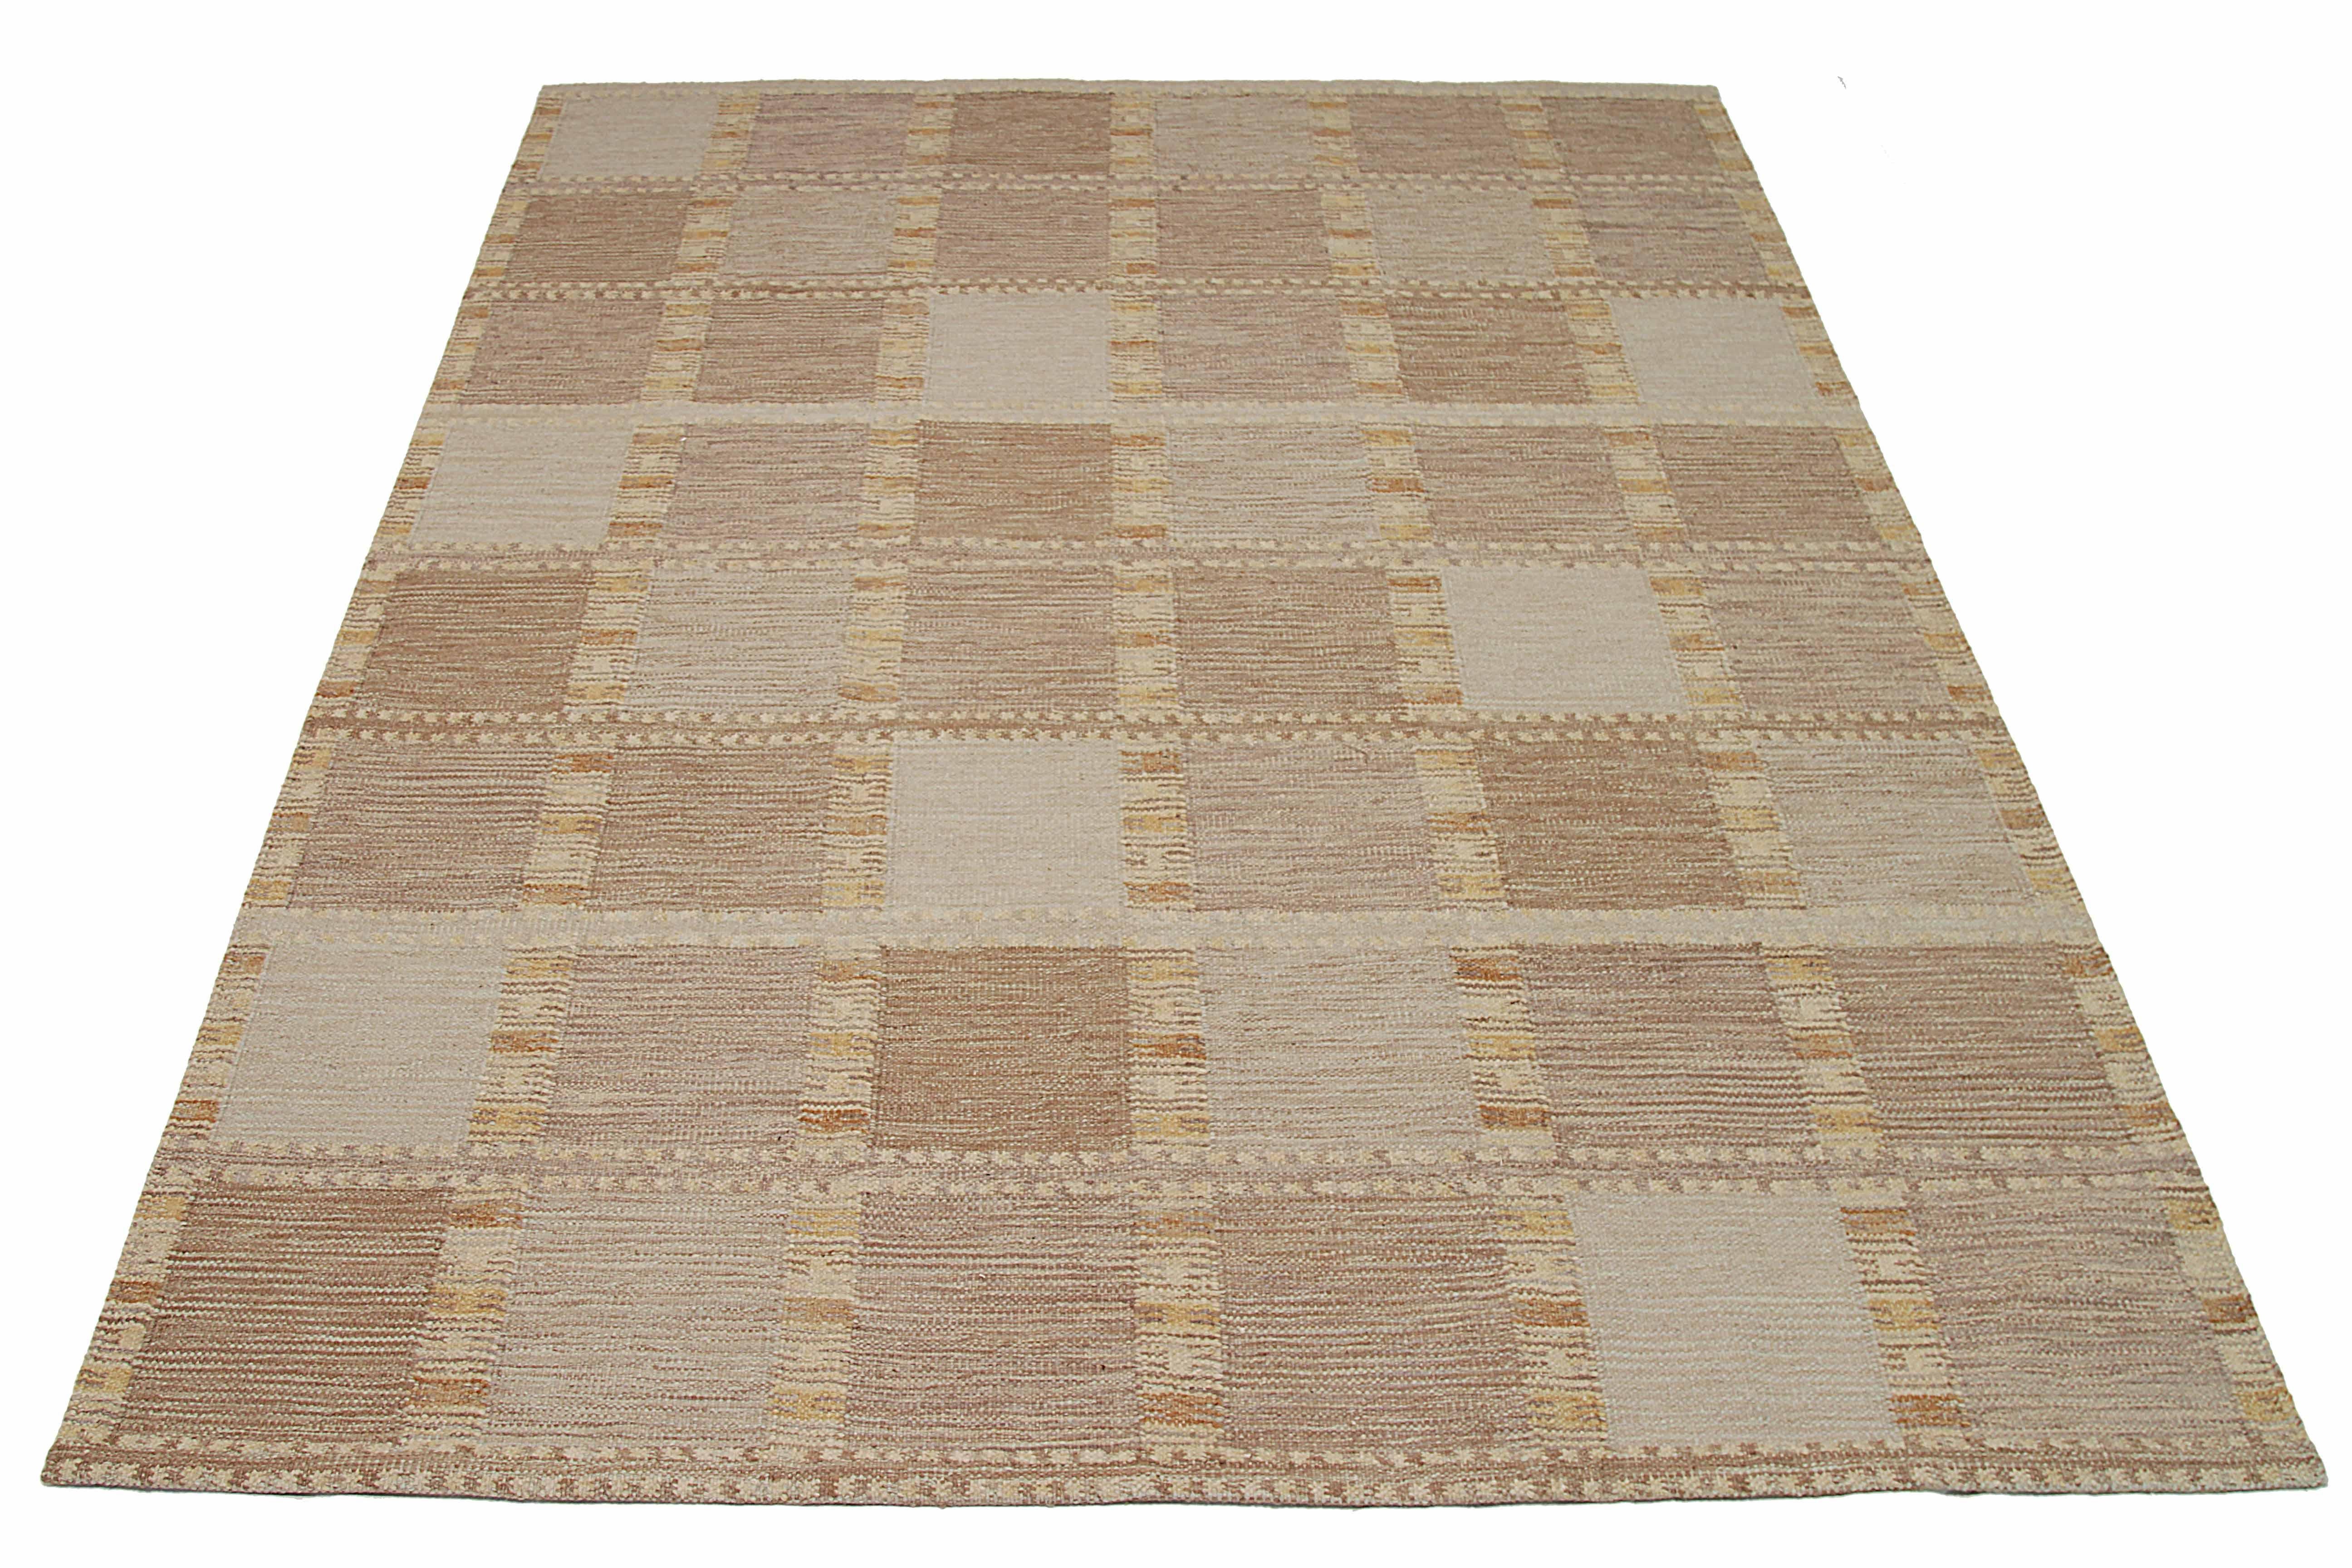 New Indian area rug handwoven from the finest sheep’s wool. It’s colored with all-natural vegetable dyes that are safe for humans and pets. It’s a traditional Scandinavian design handwoven by expert artisans. It’s a lovely area rug that can be